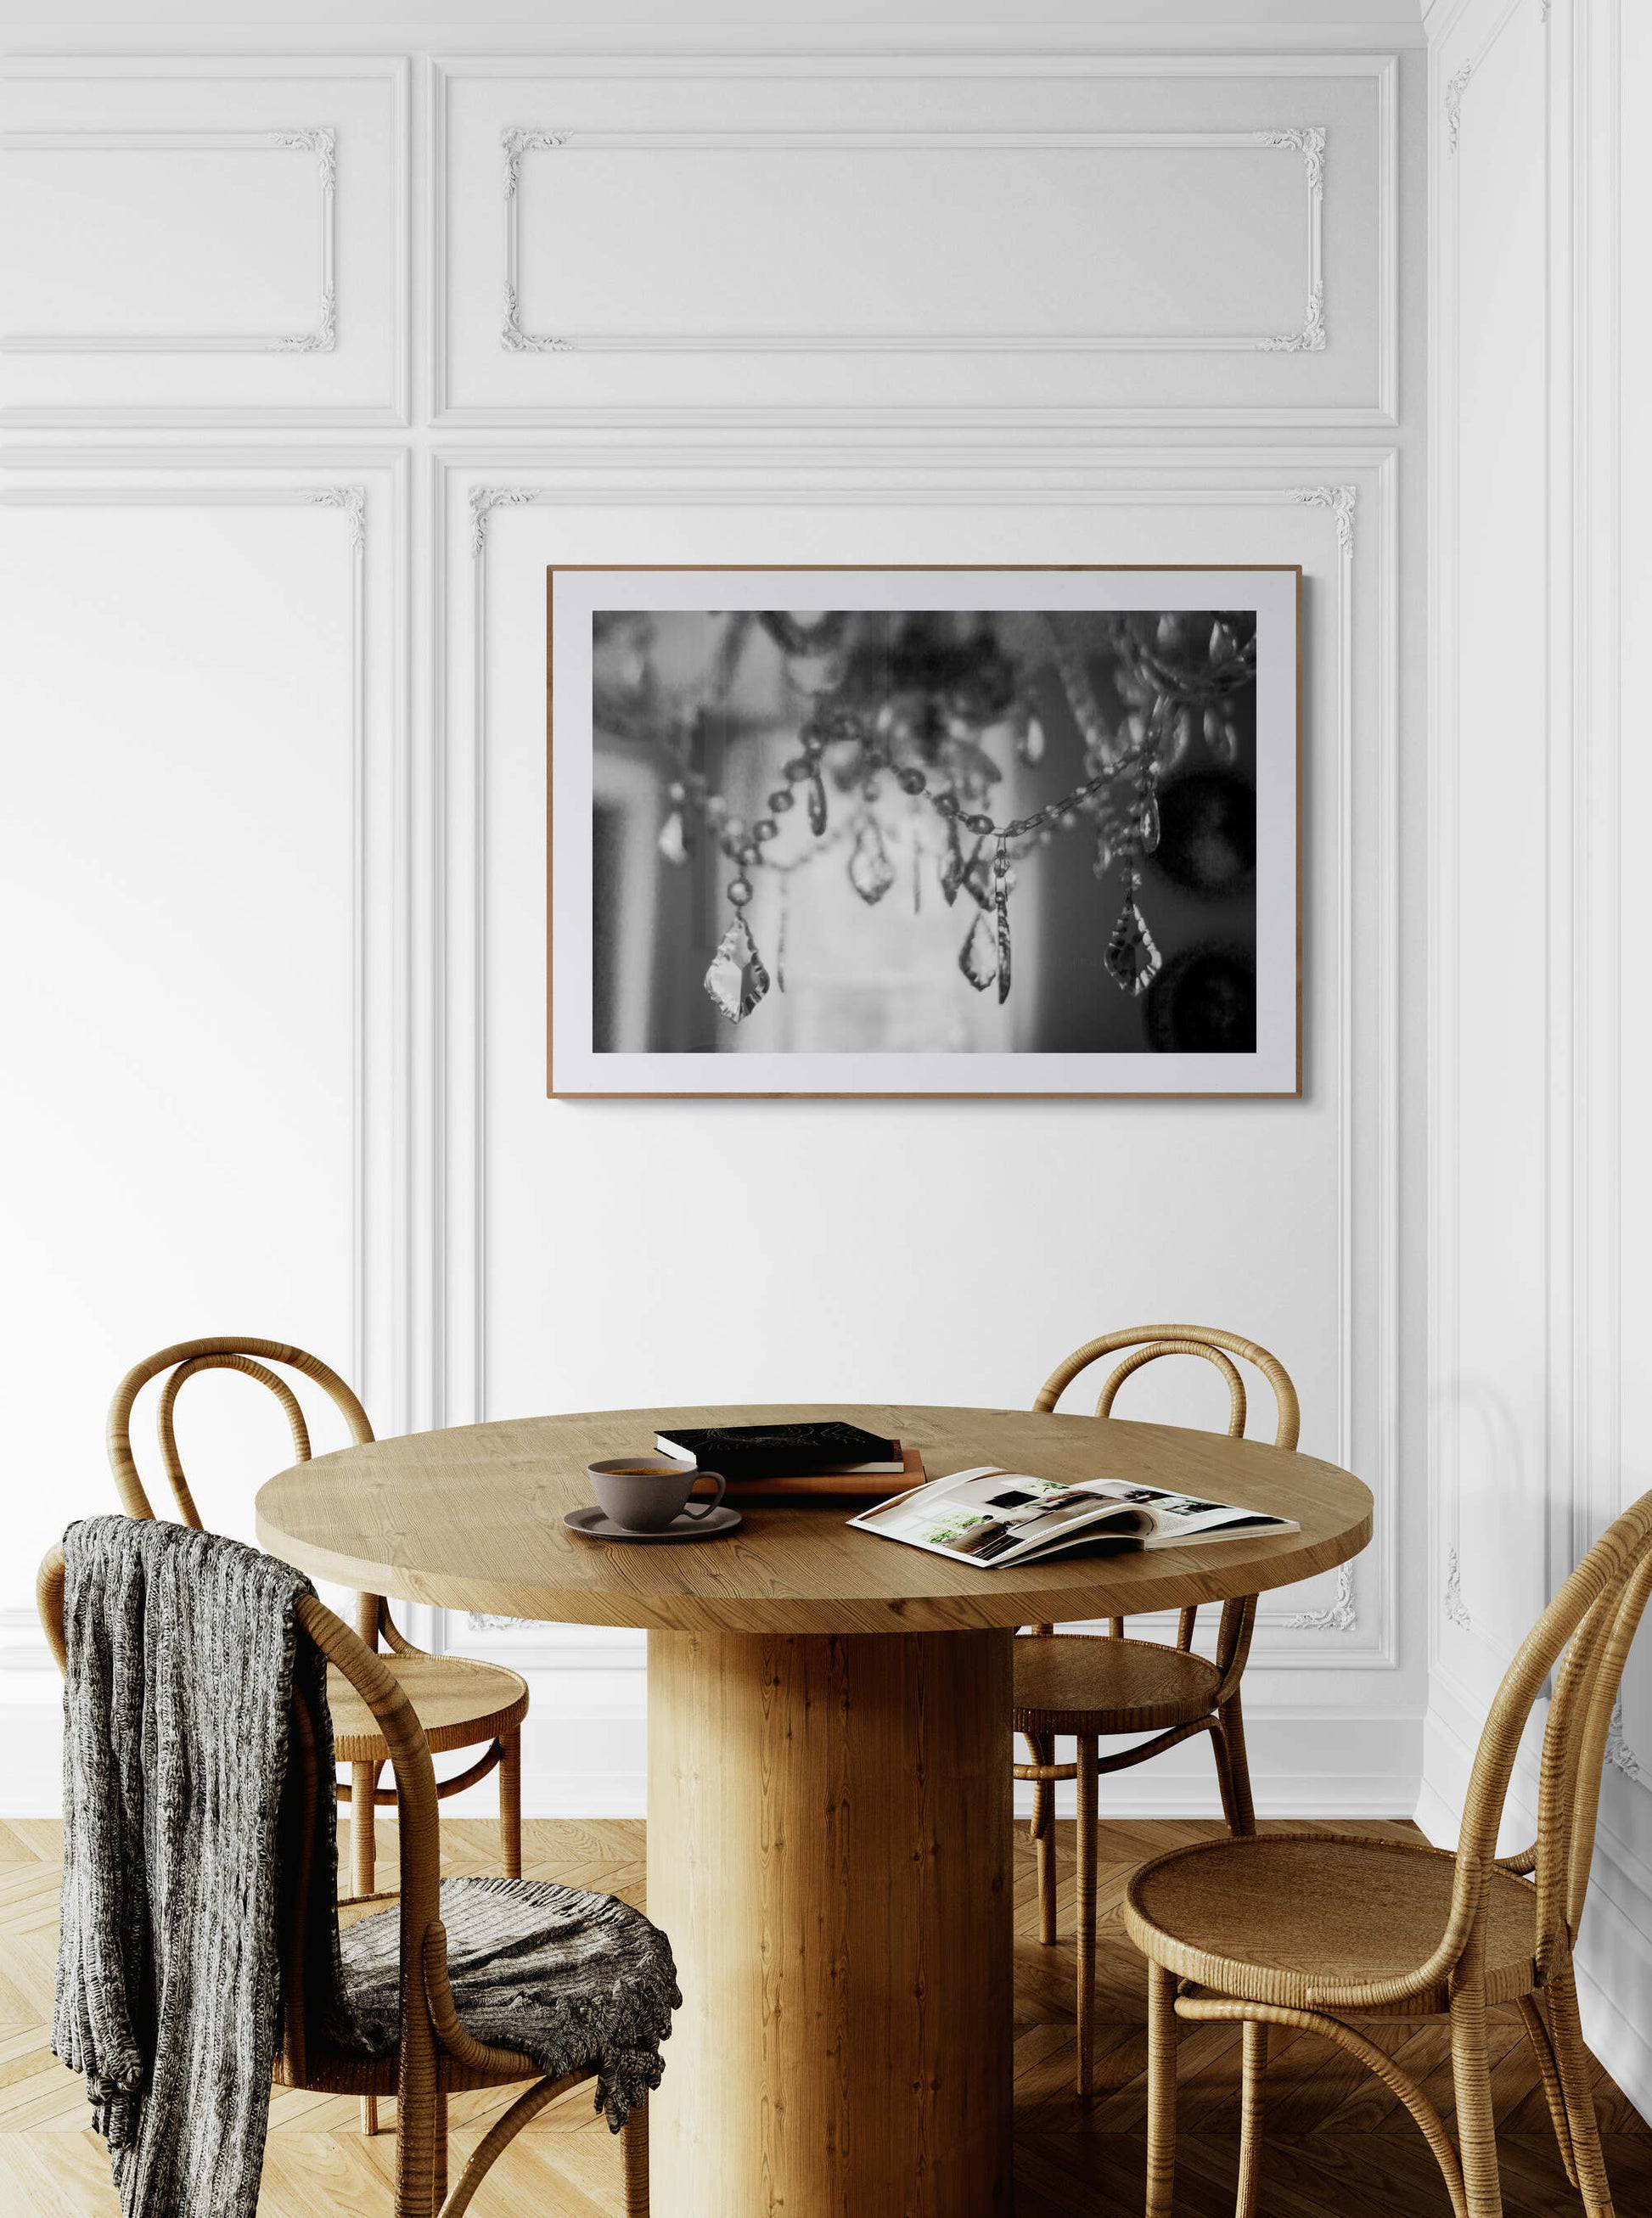 Black and White Photograph Wall Art Print of a Chandelier in a dining space